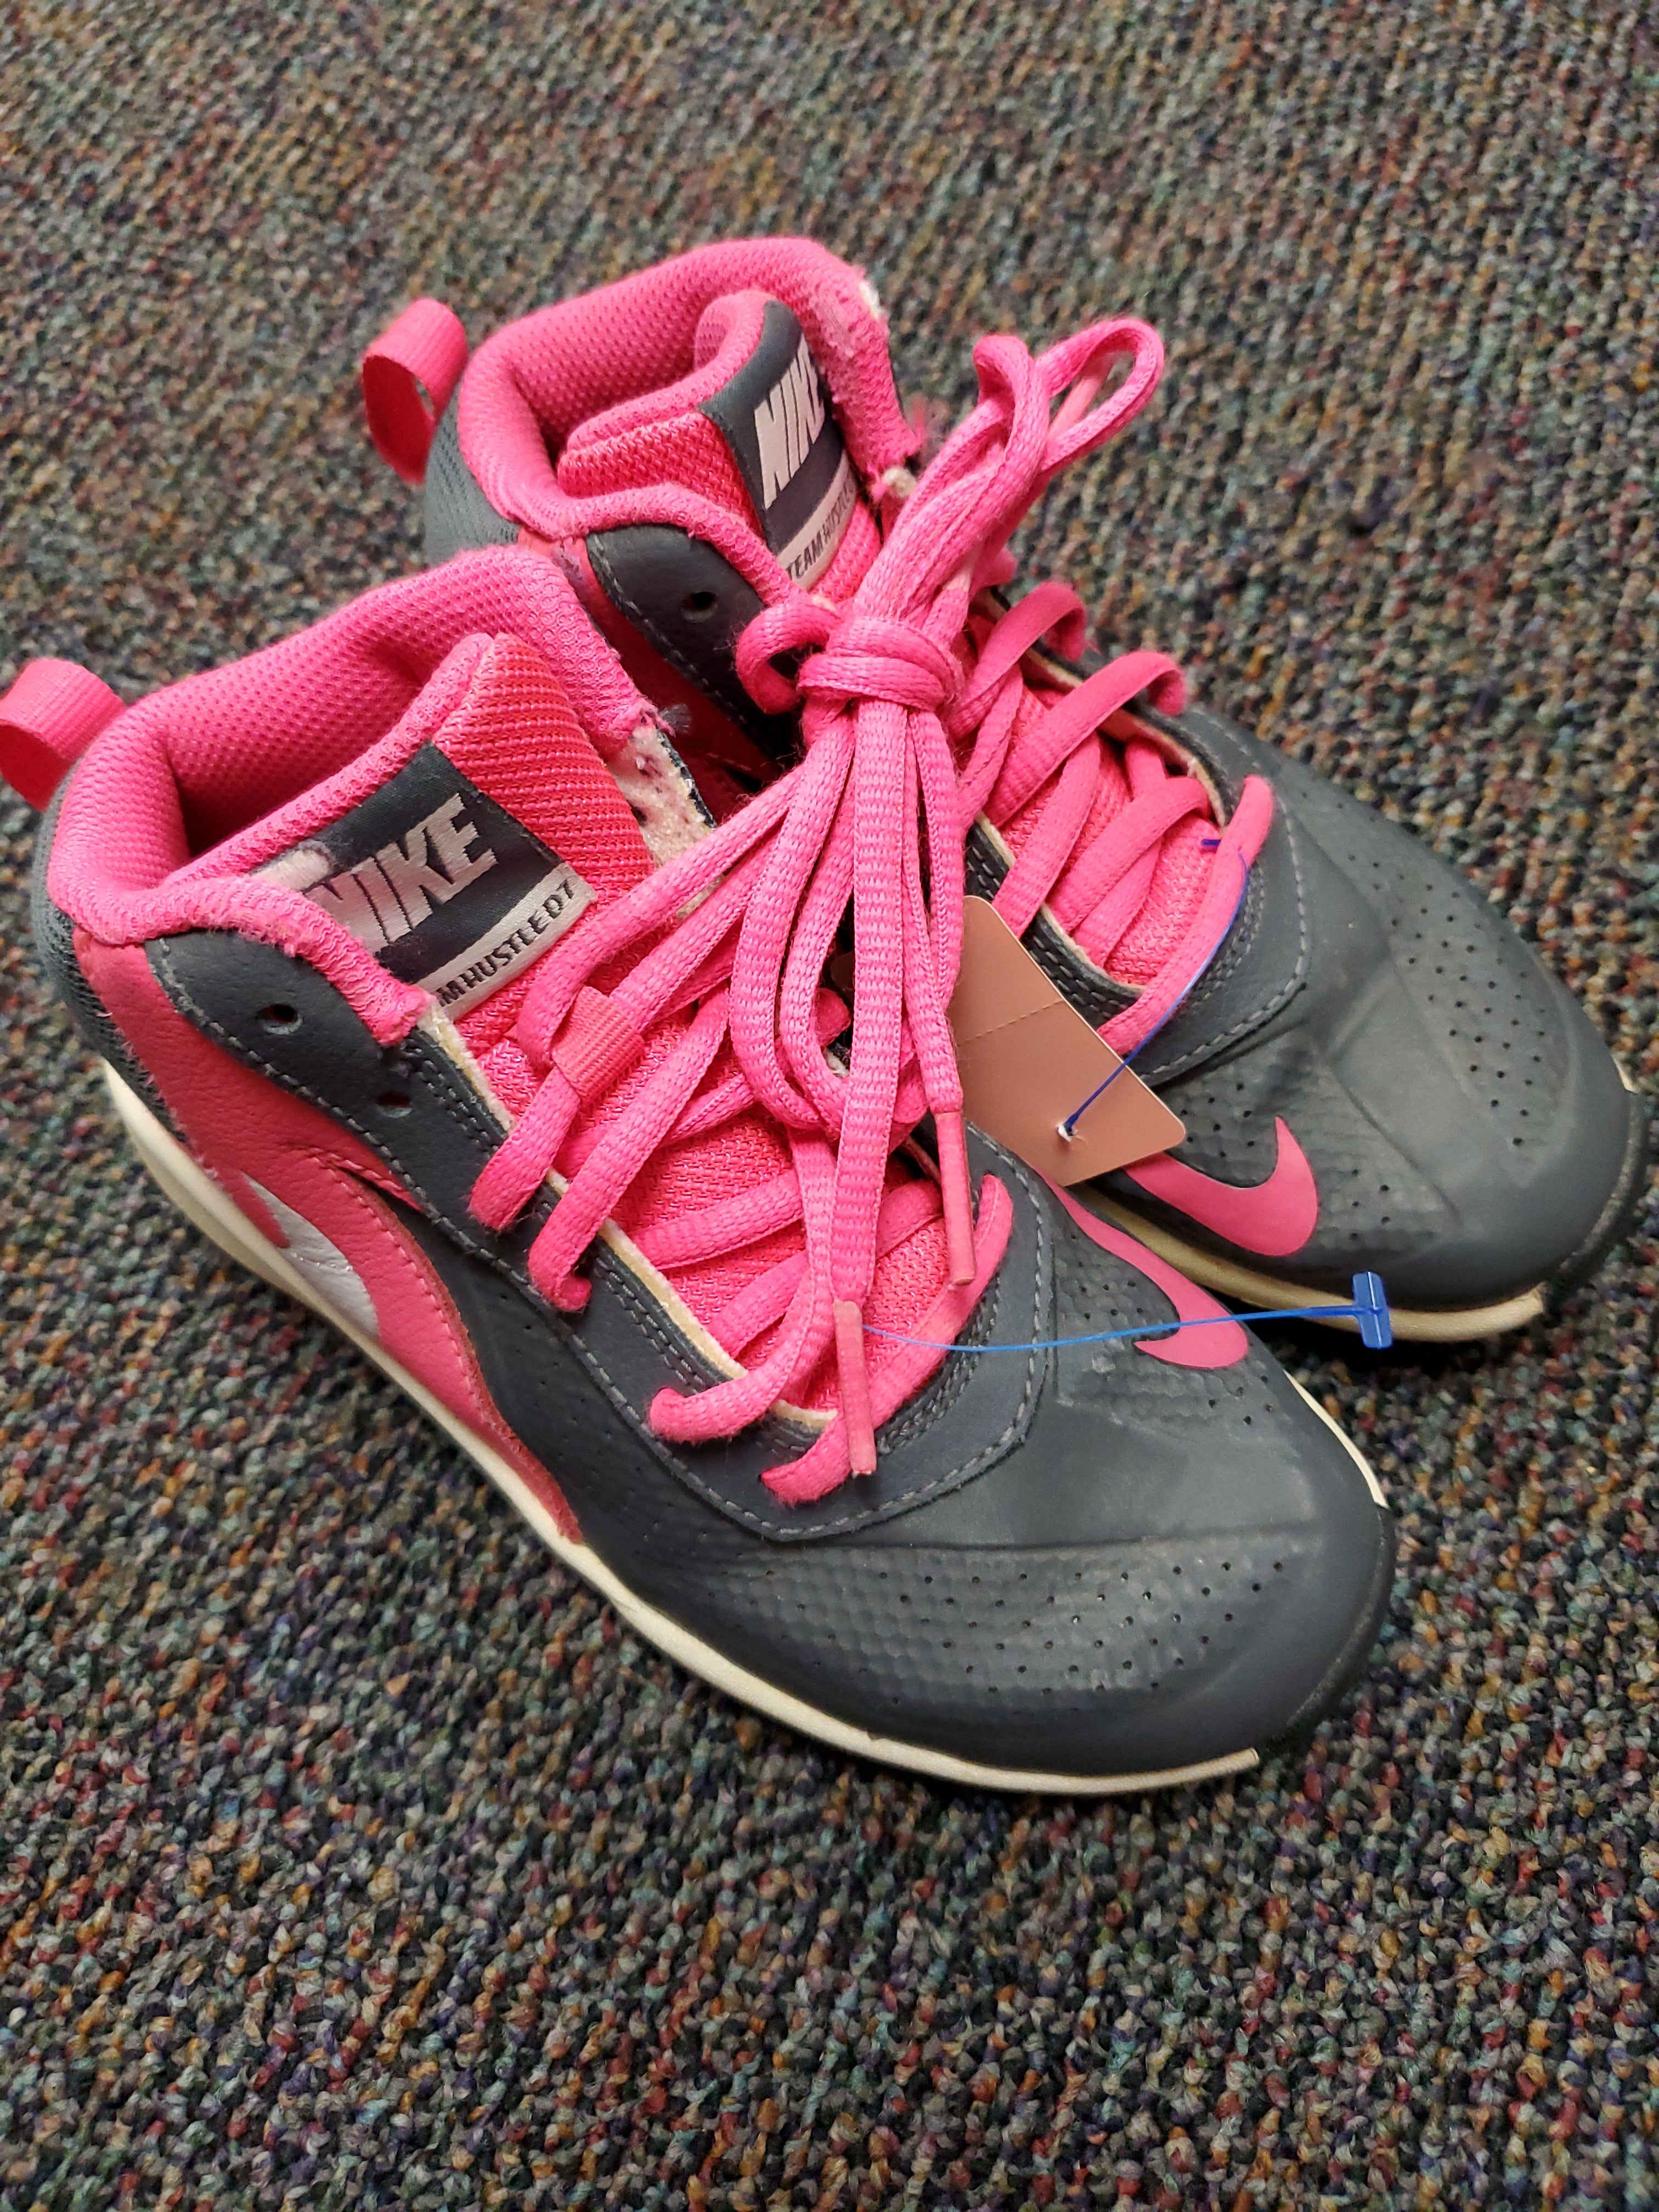 Nike's high top girls pink and gray shoes sz12.5